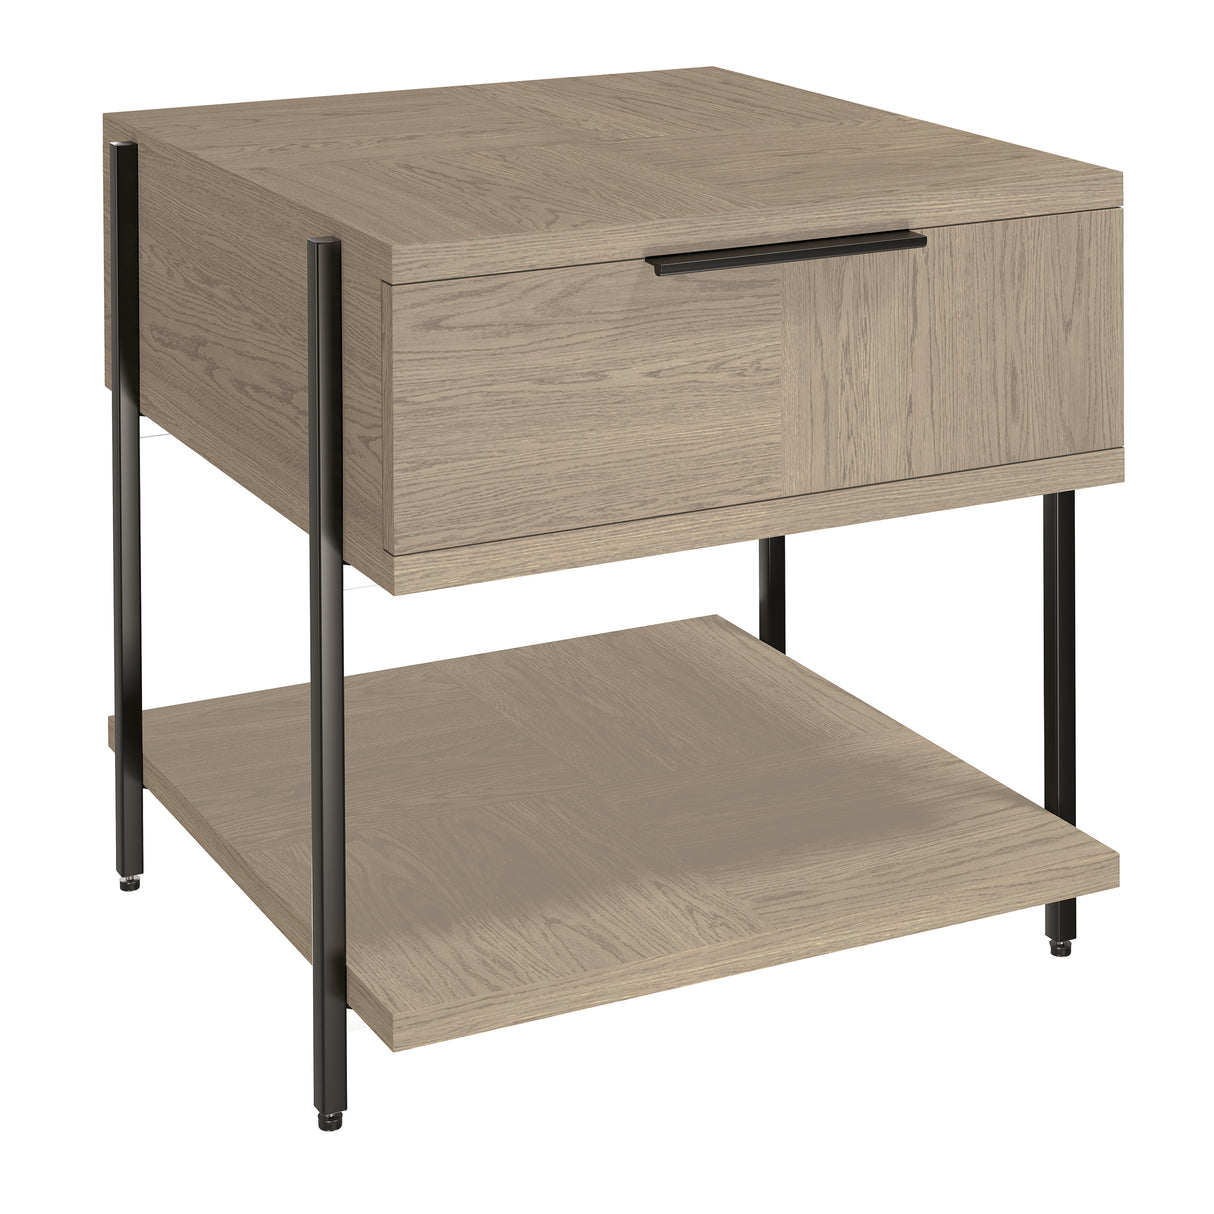 Hekman 25907 Mayfield 24.25in. x 26.75in. x 26in. End Table